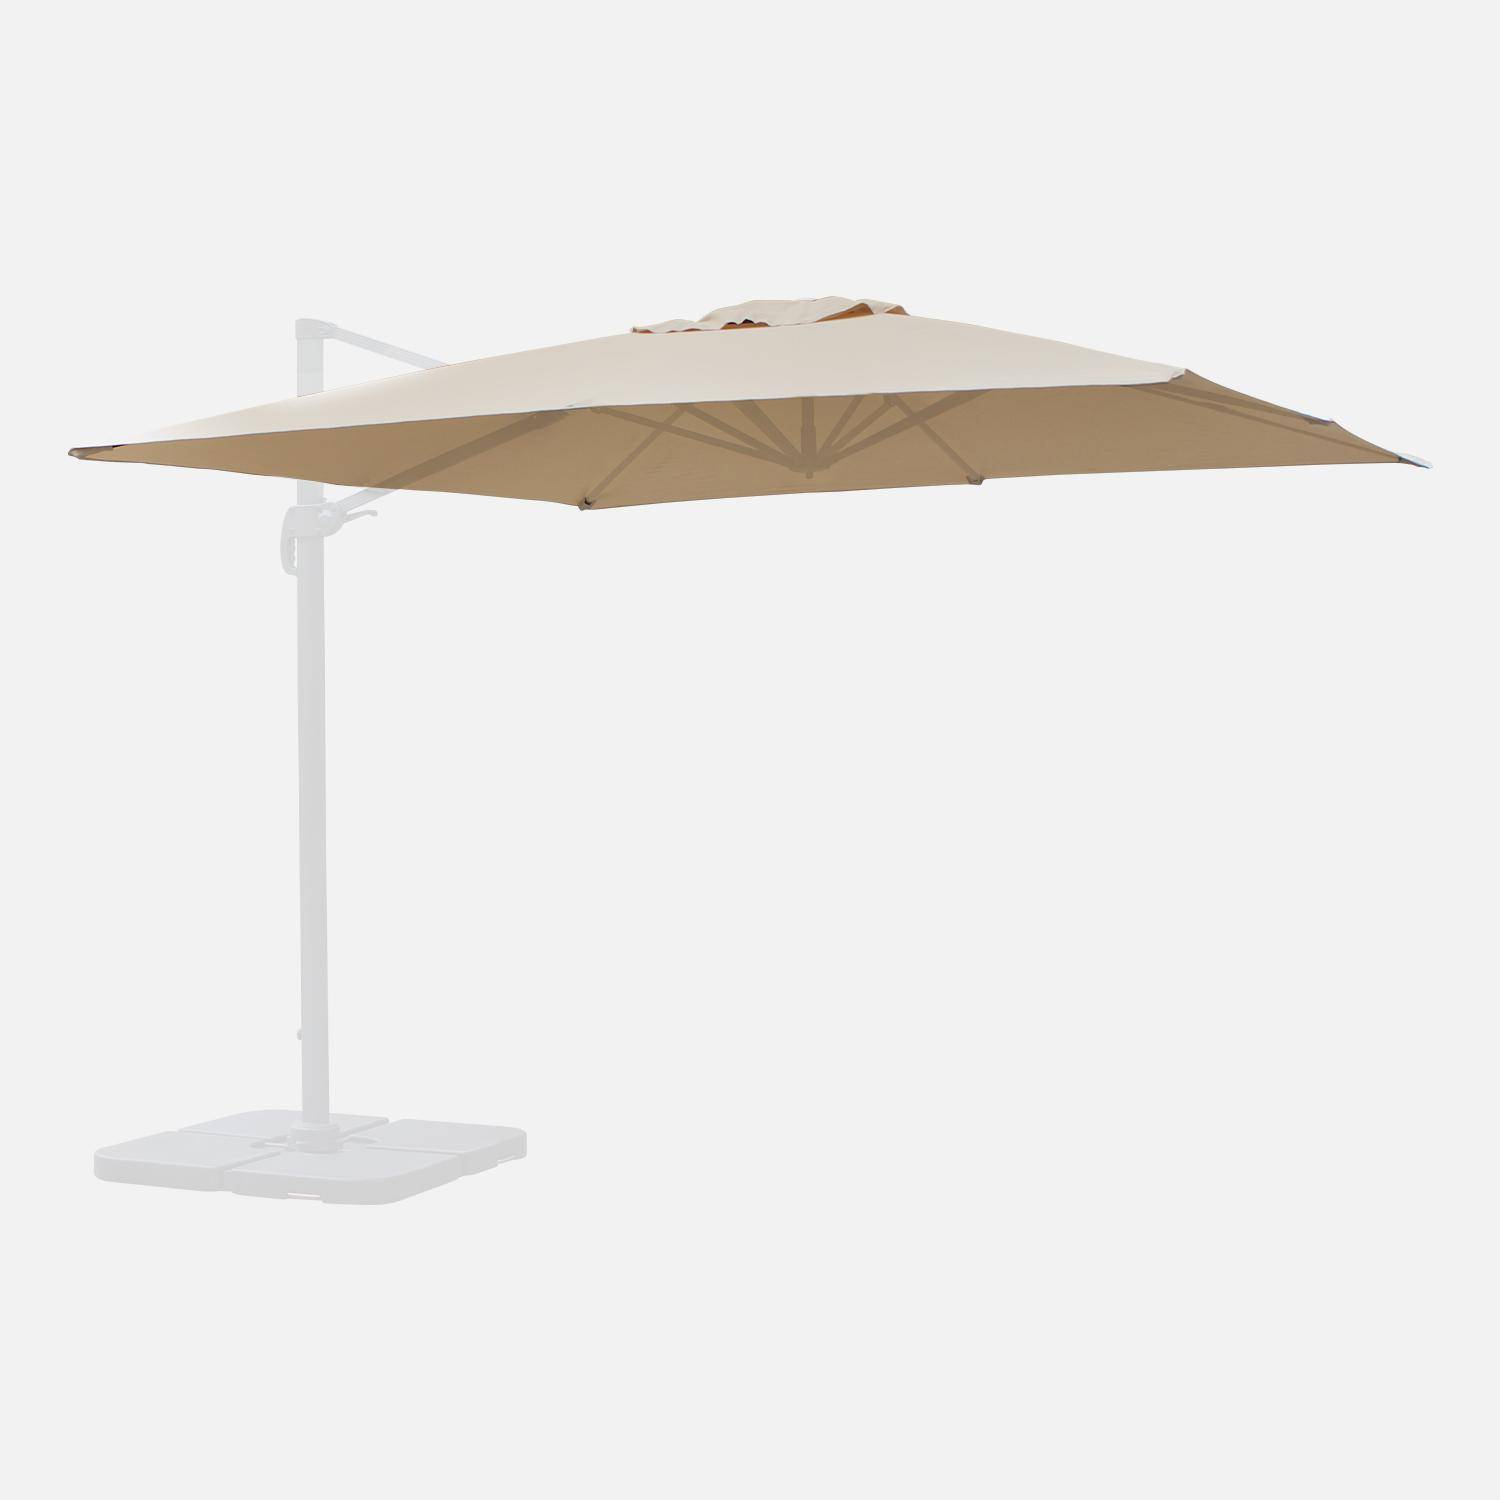 Beige 3x3m canopy for the Falgos parasol - replacement canopy,sweeek,Photo3